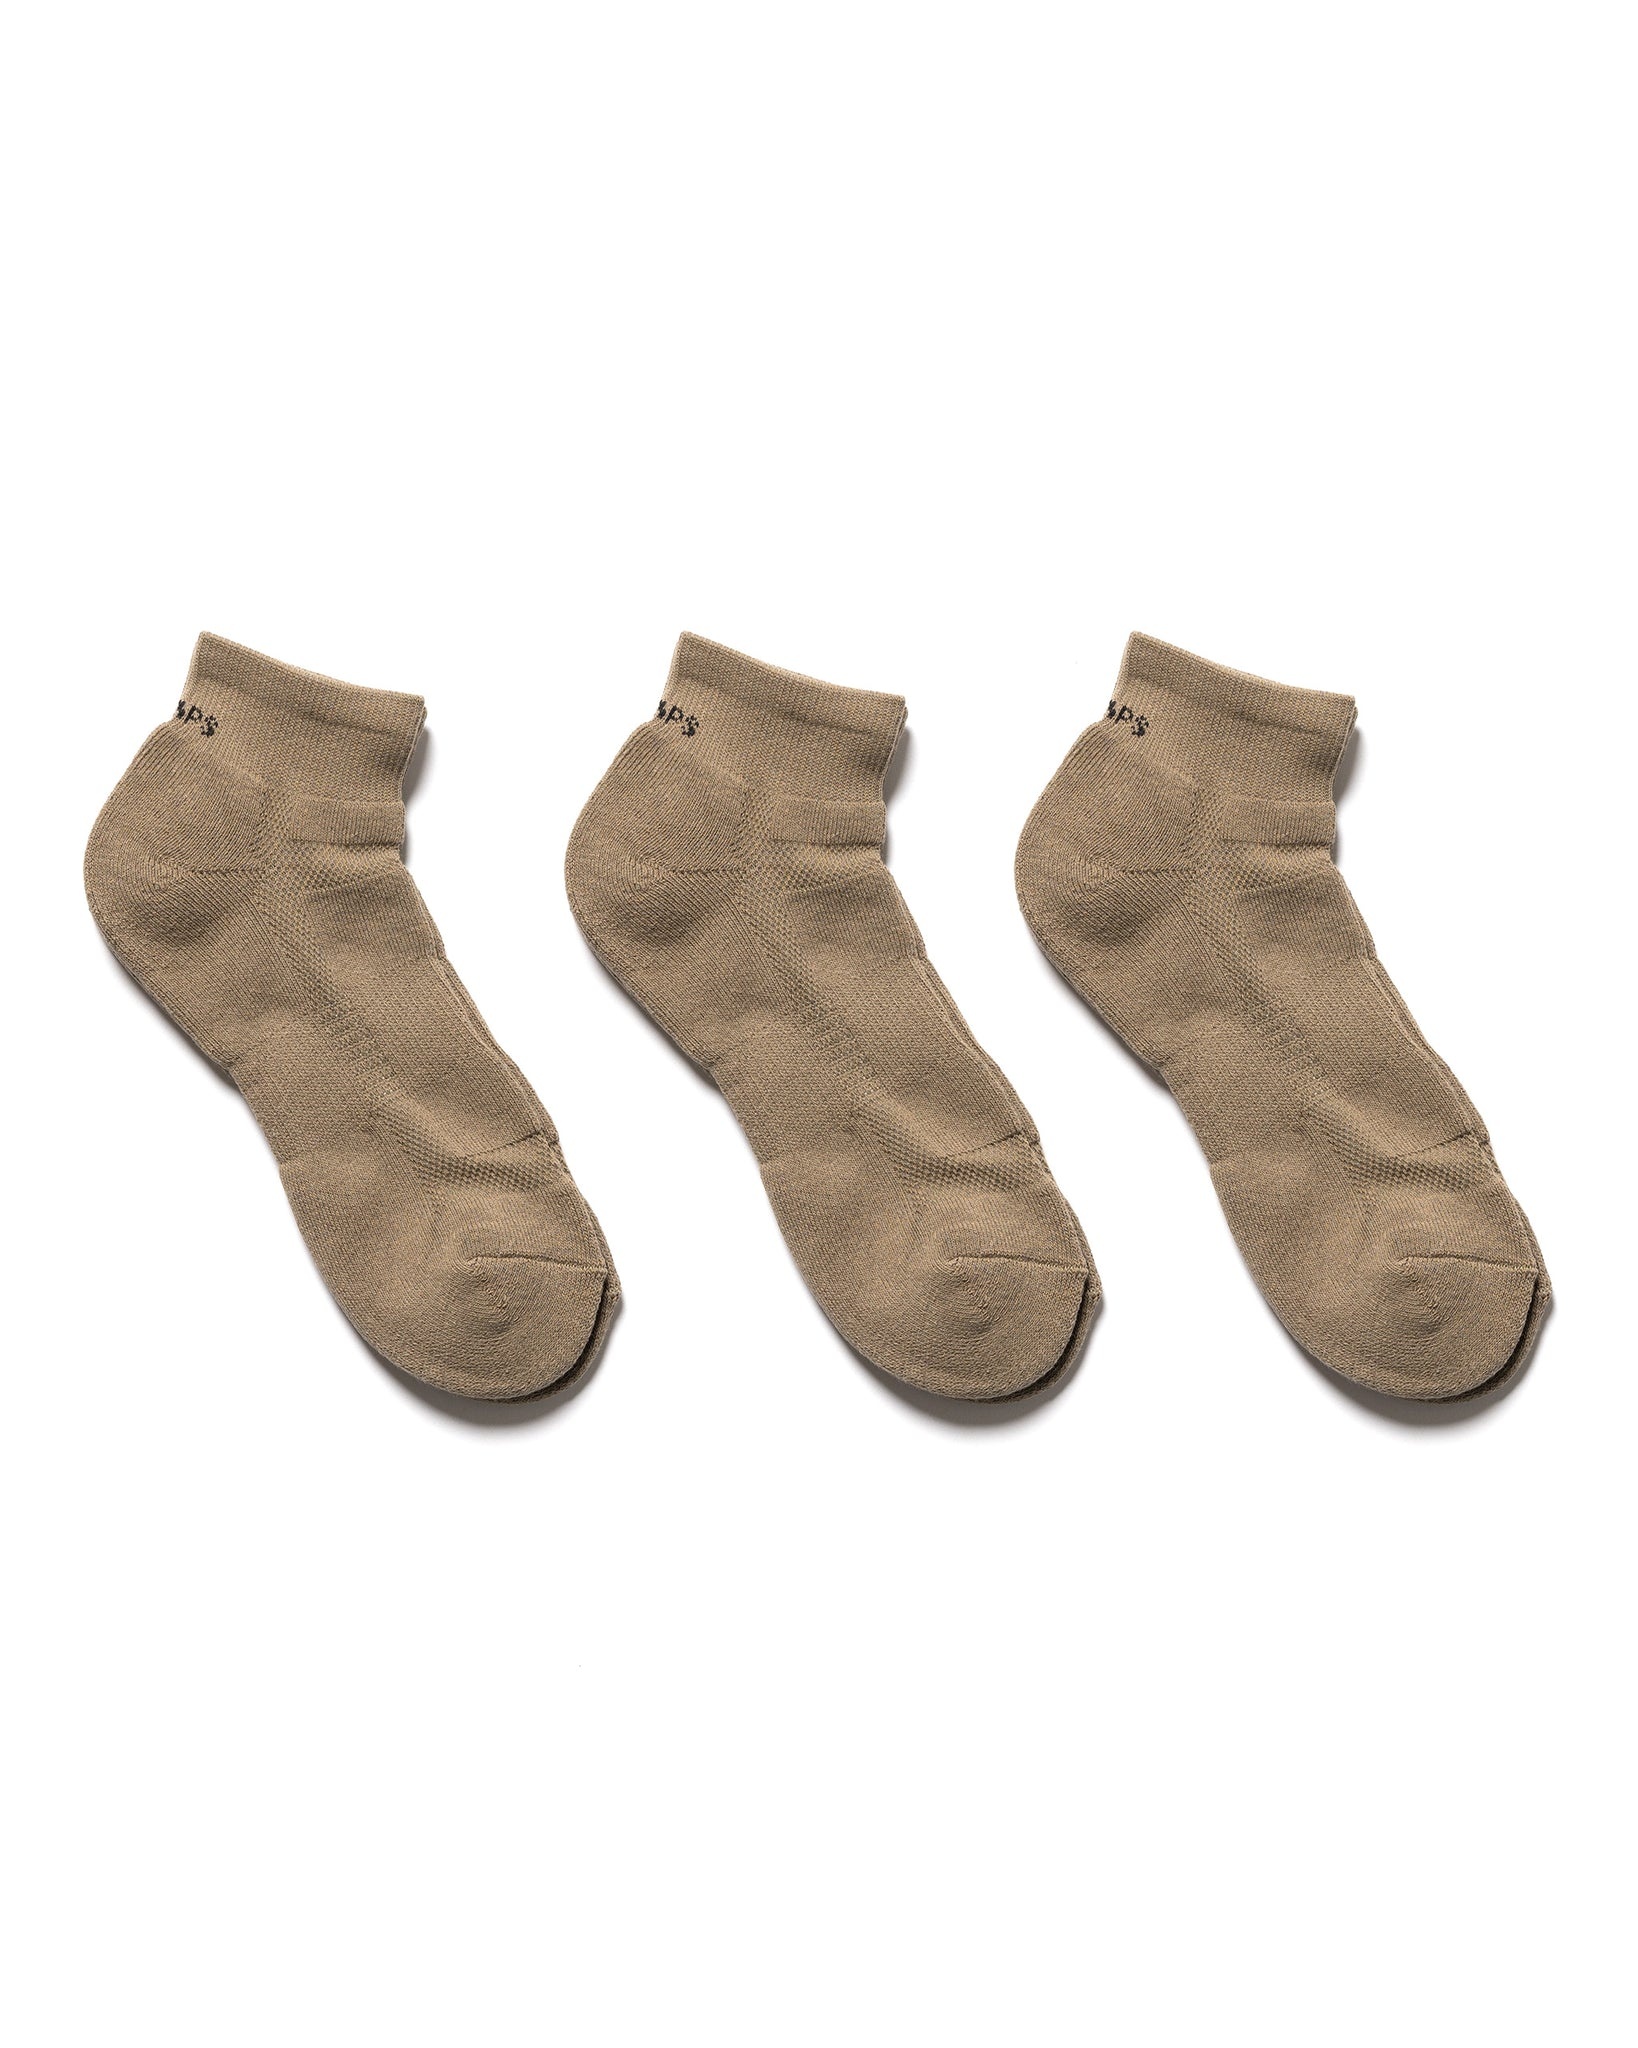 Skivvies 3 Piece Ankle Sox Olive Drab - 1